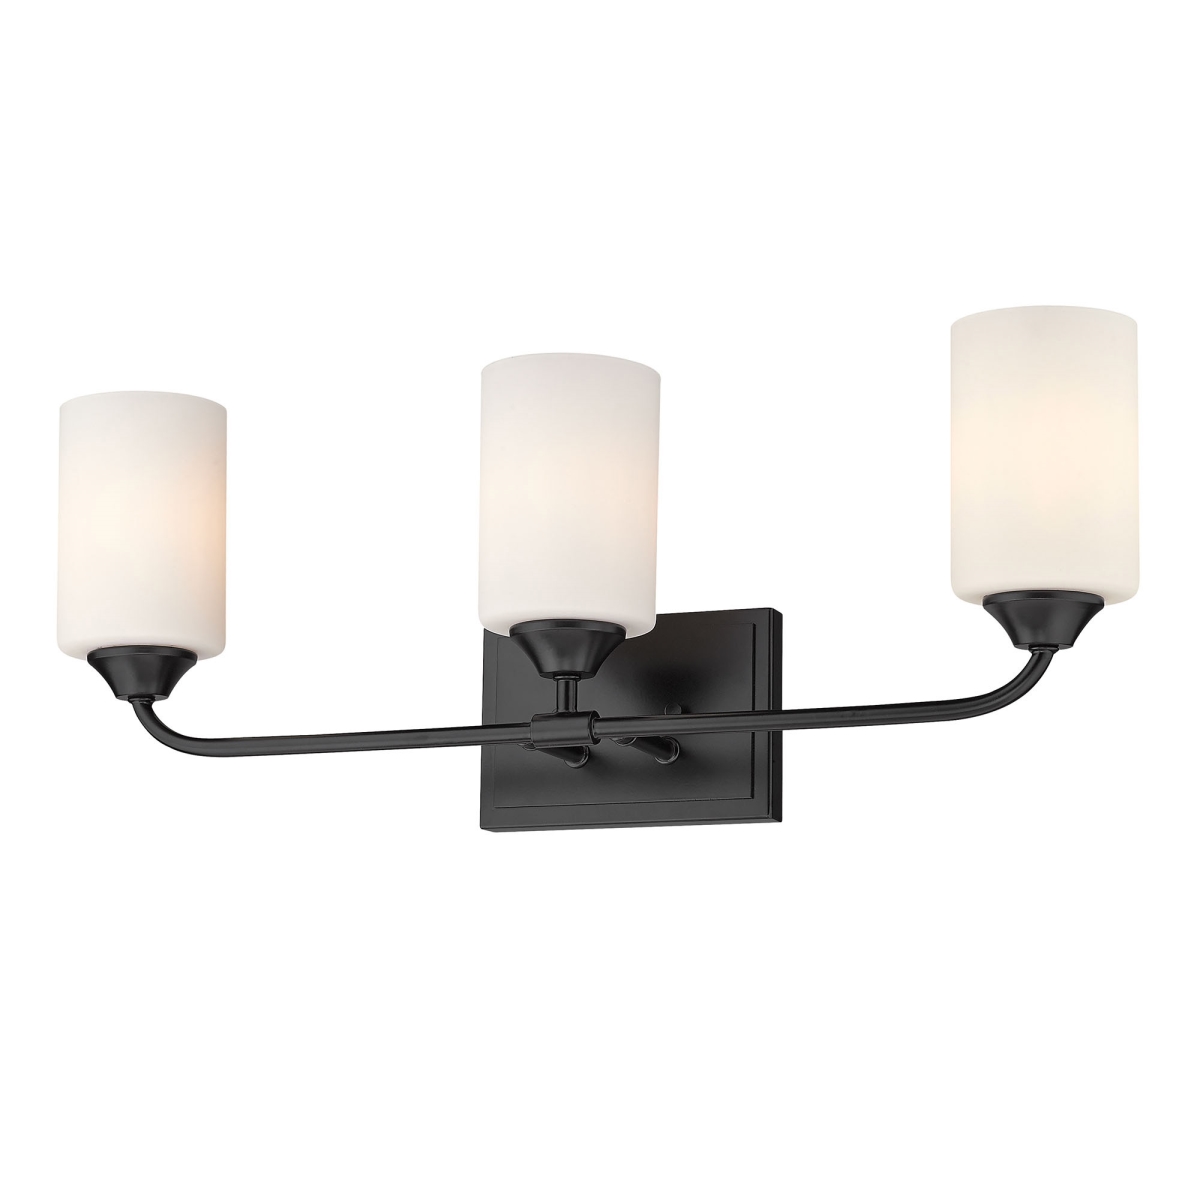 Picture of Golden Lighting 2120-BA3 BLK-CYL-OP Ormond 3 Light Bath Vanity in Black with Cylindrical Opal Glass Shade